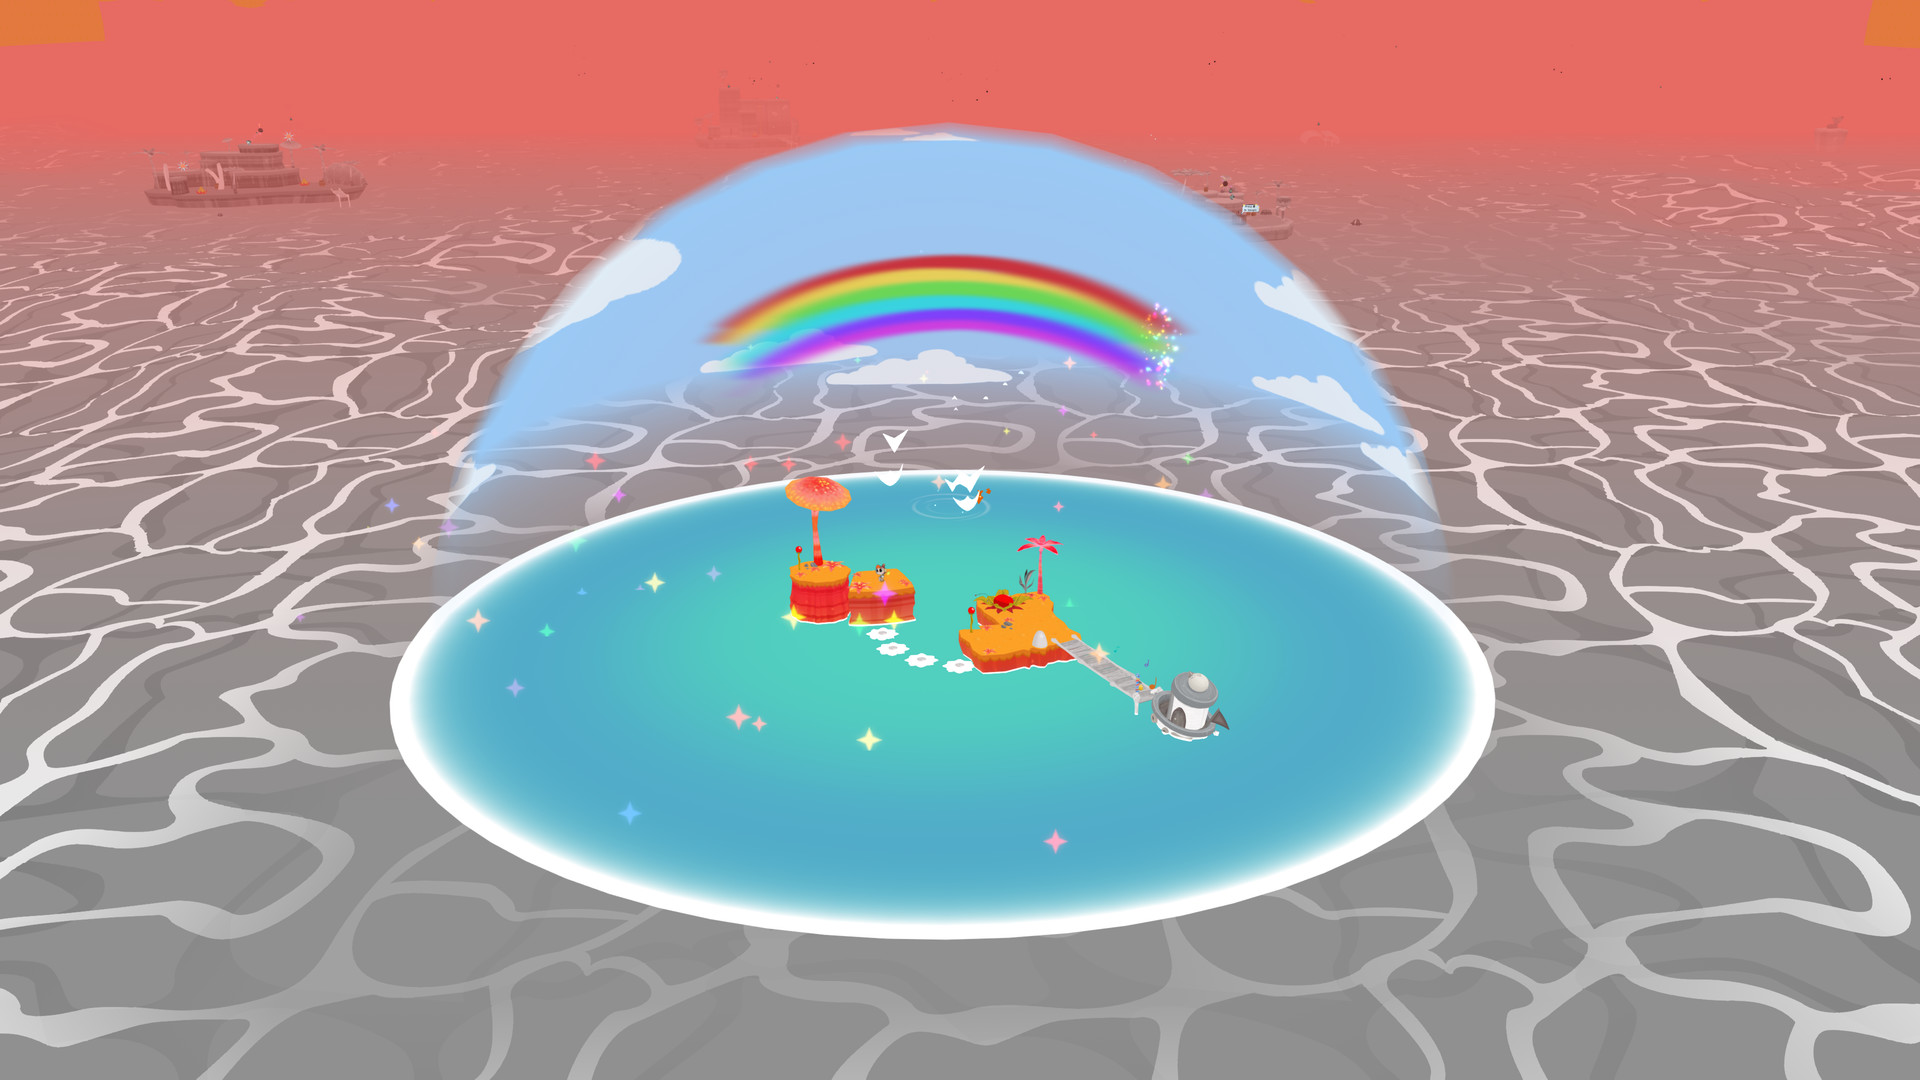 Rainbow Billy: The Curse of the Leviathan Free Download